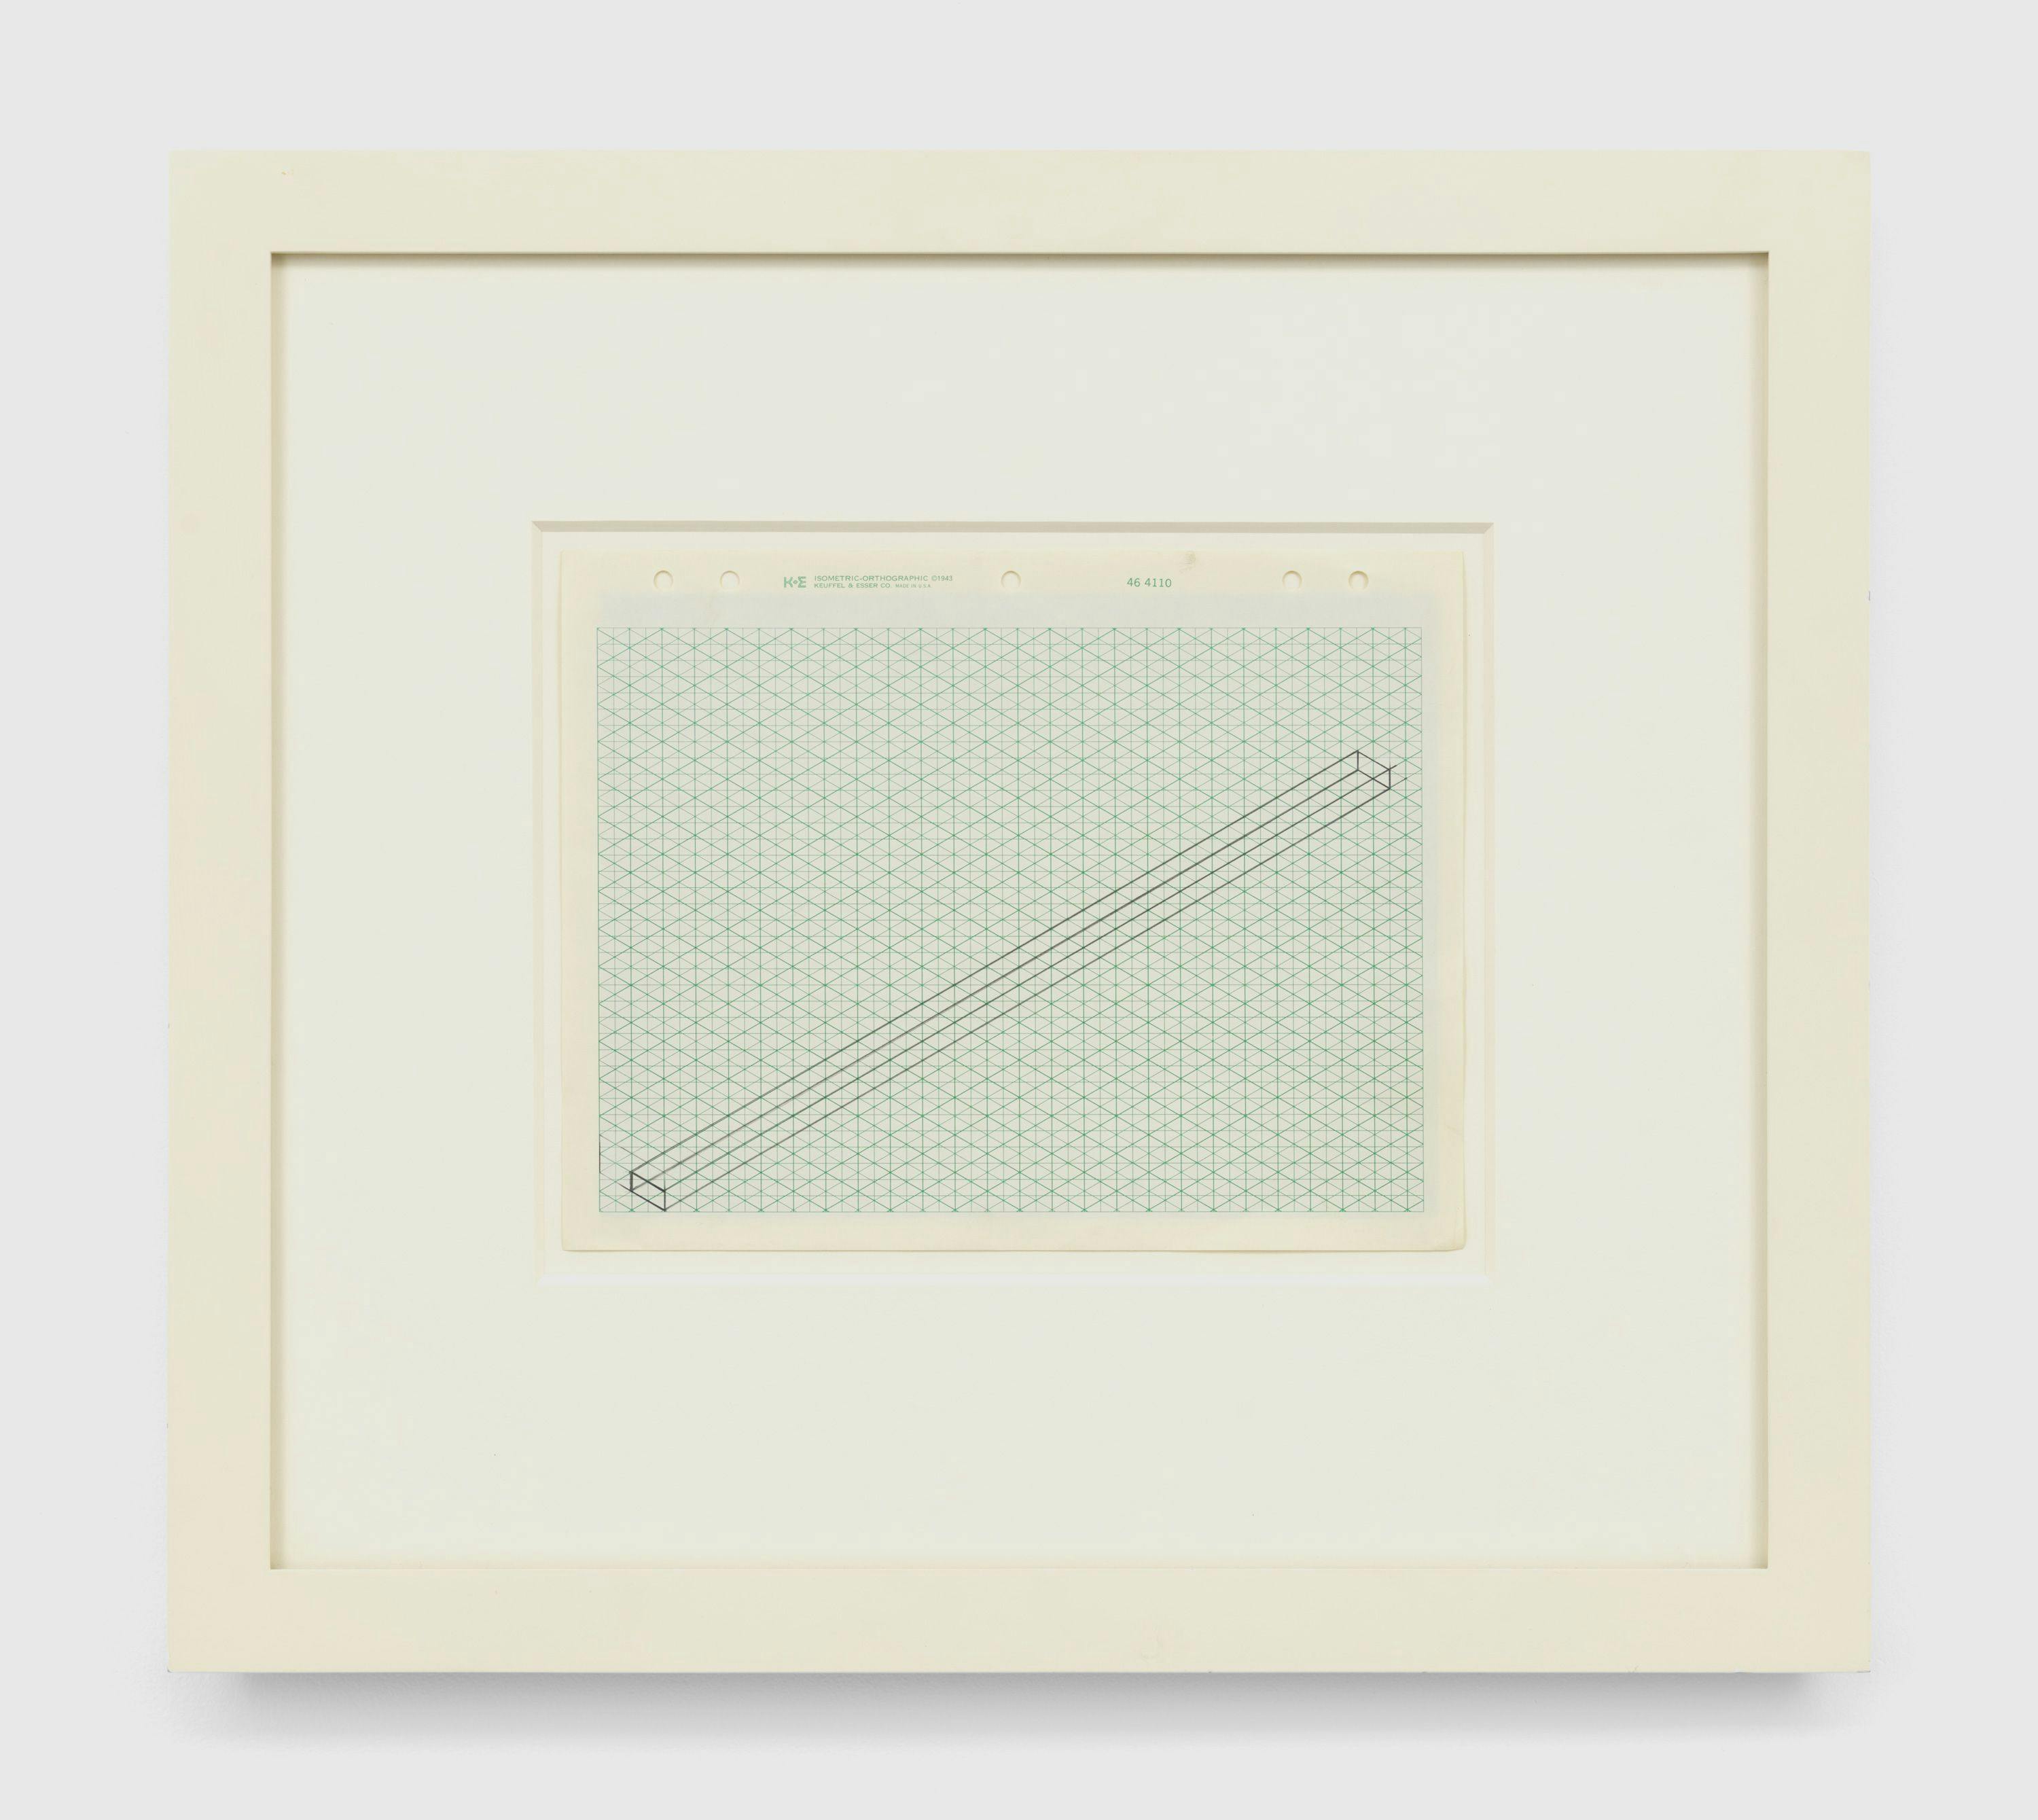 An untitled drawing by Fred Sandback, dated circa 1970 to 1974.